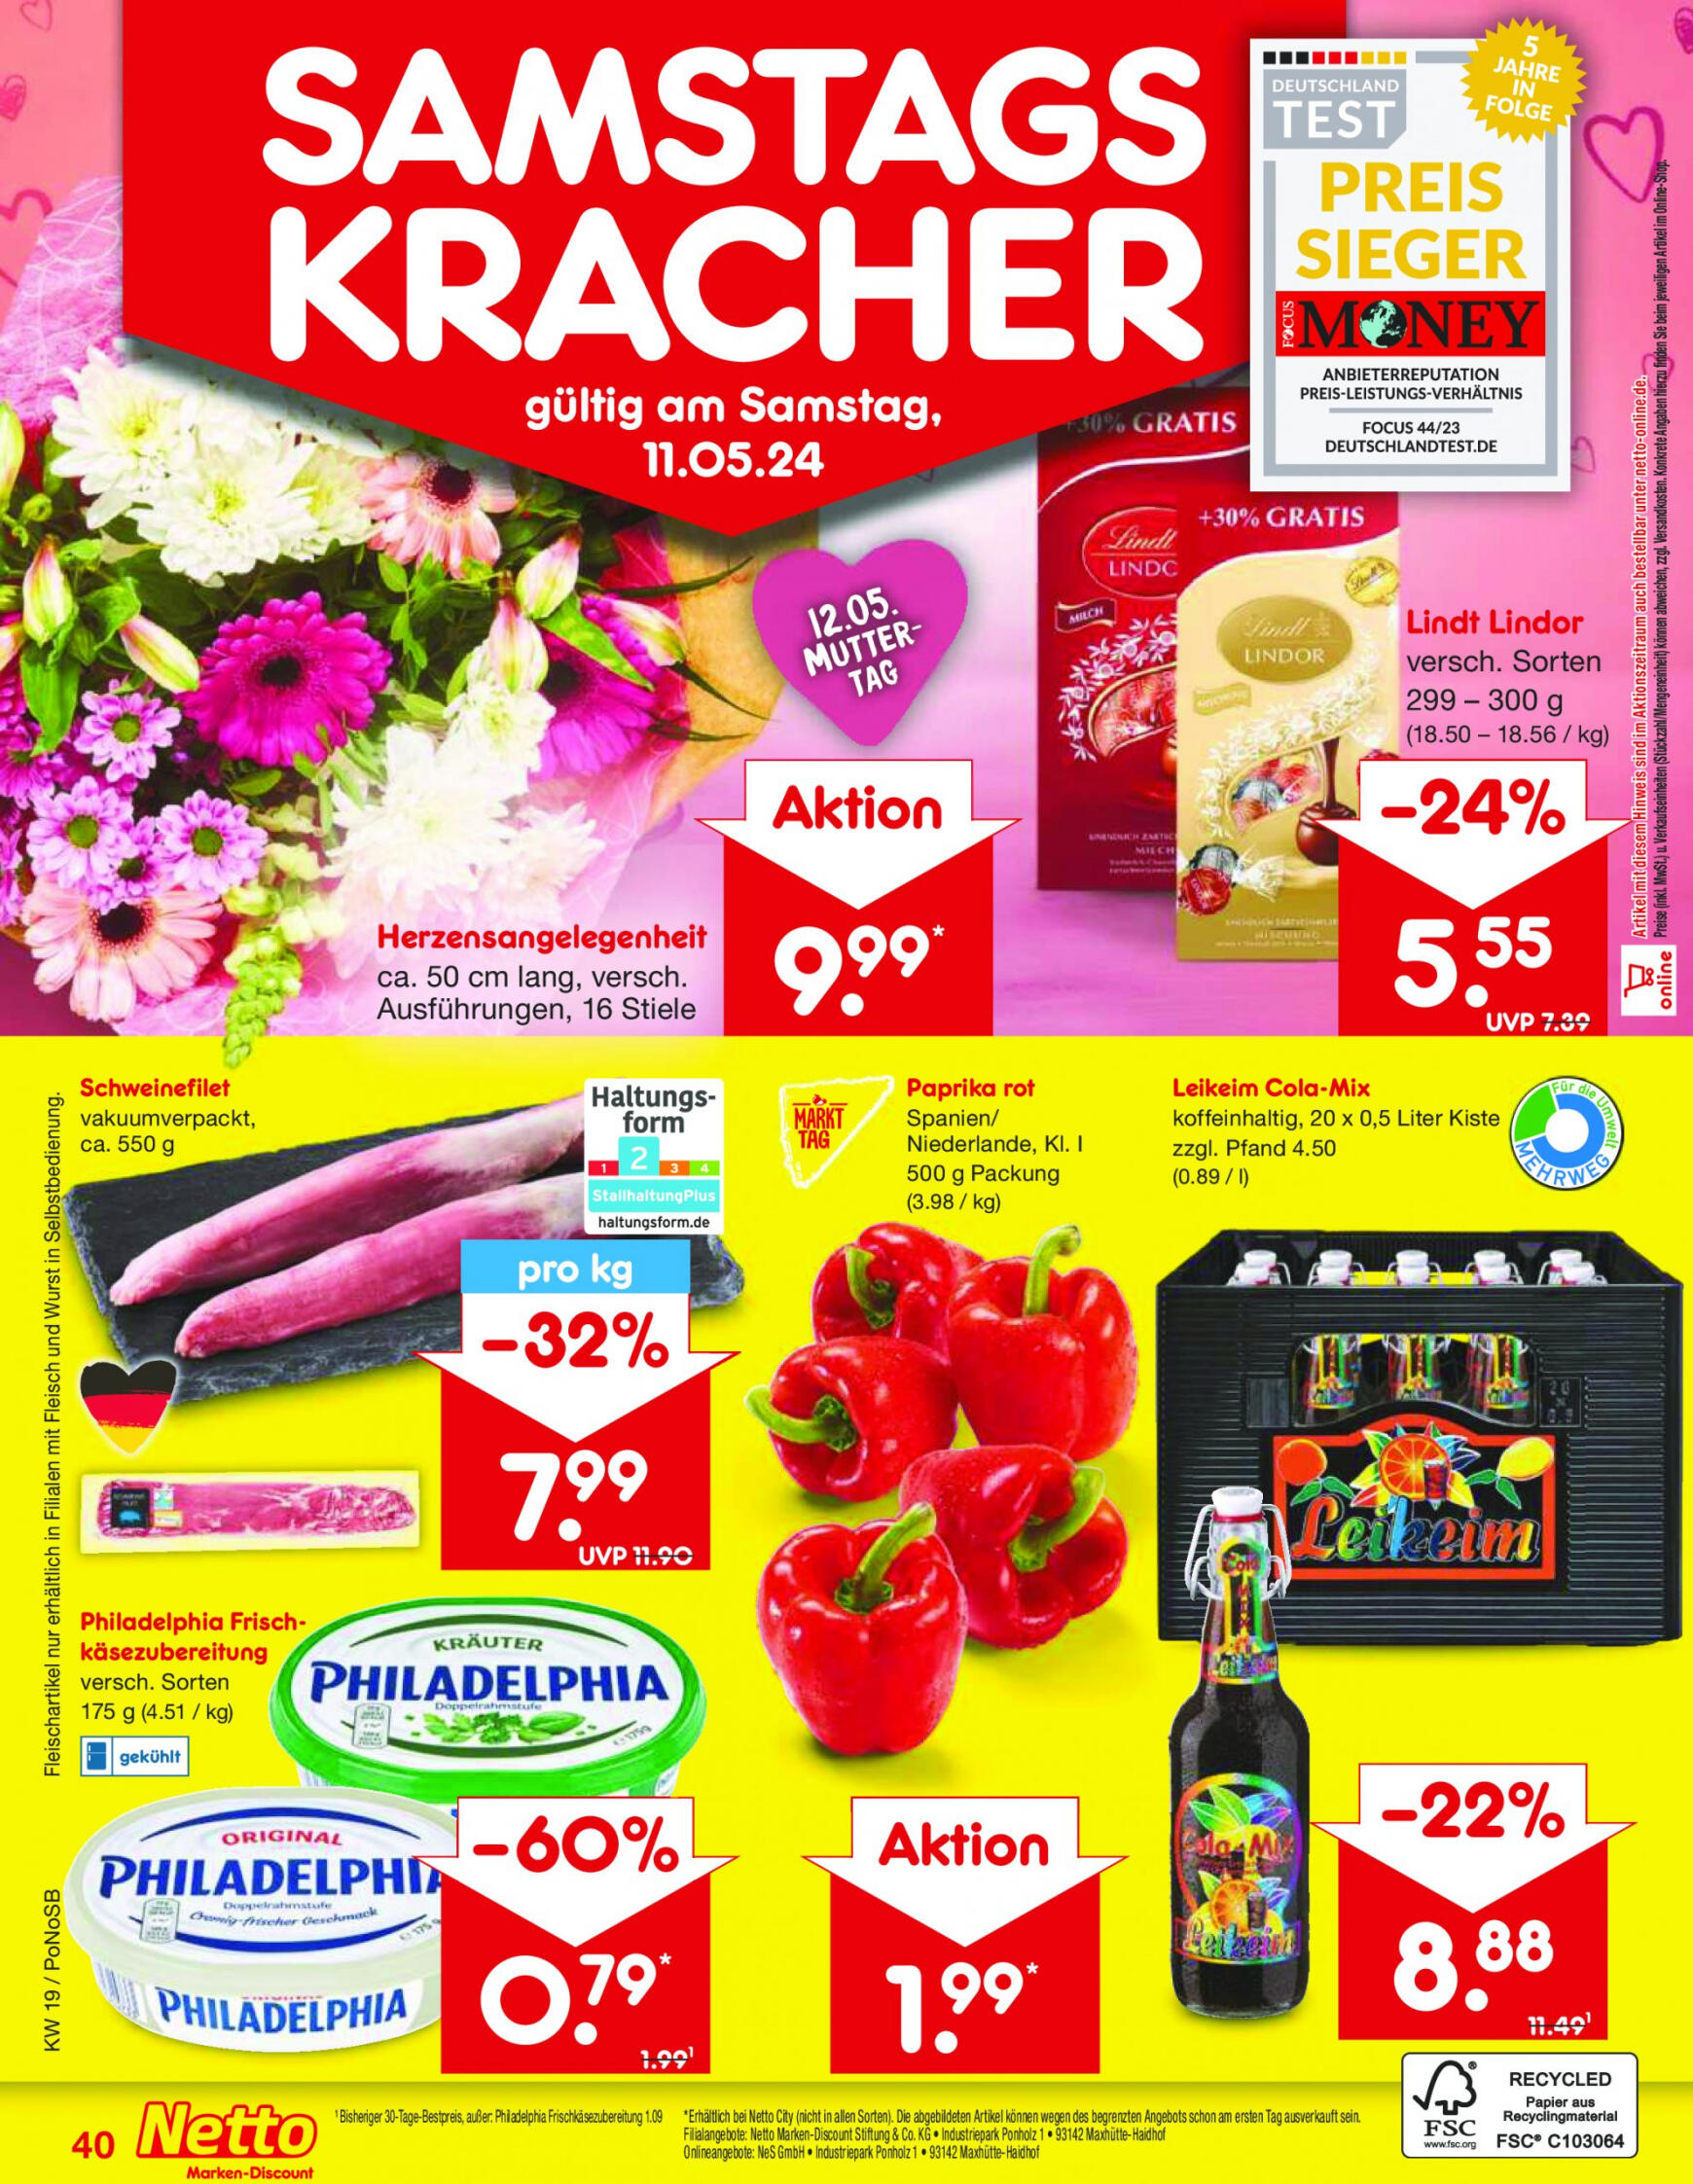 netto - Flyer Netto aktuell 06.05. - 11.05. - page: 50